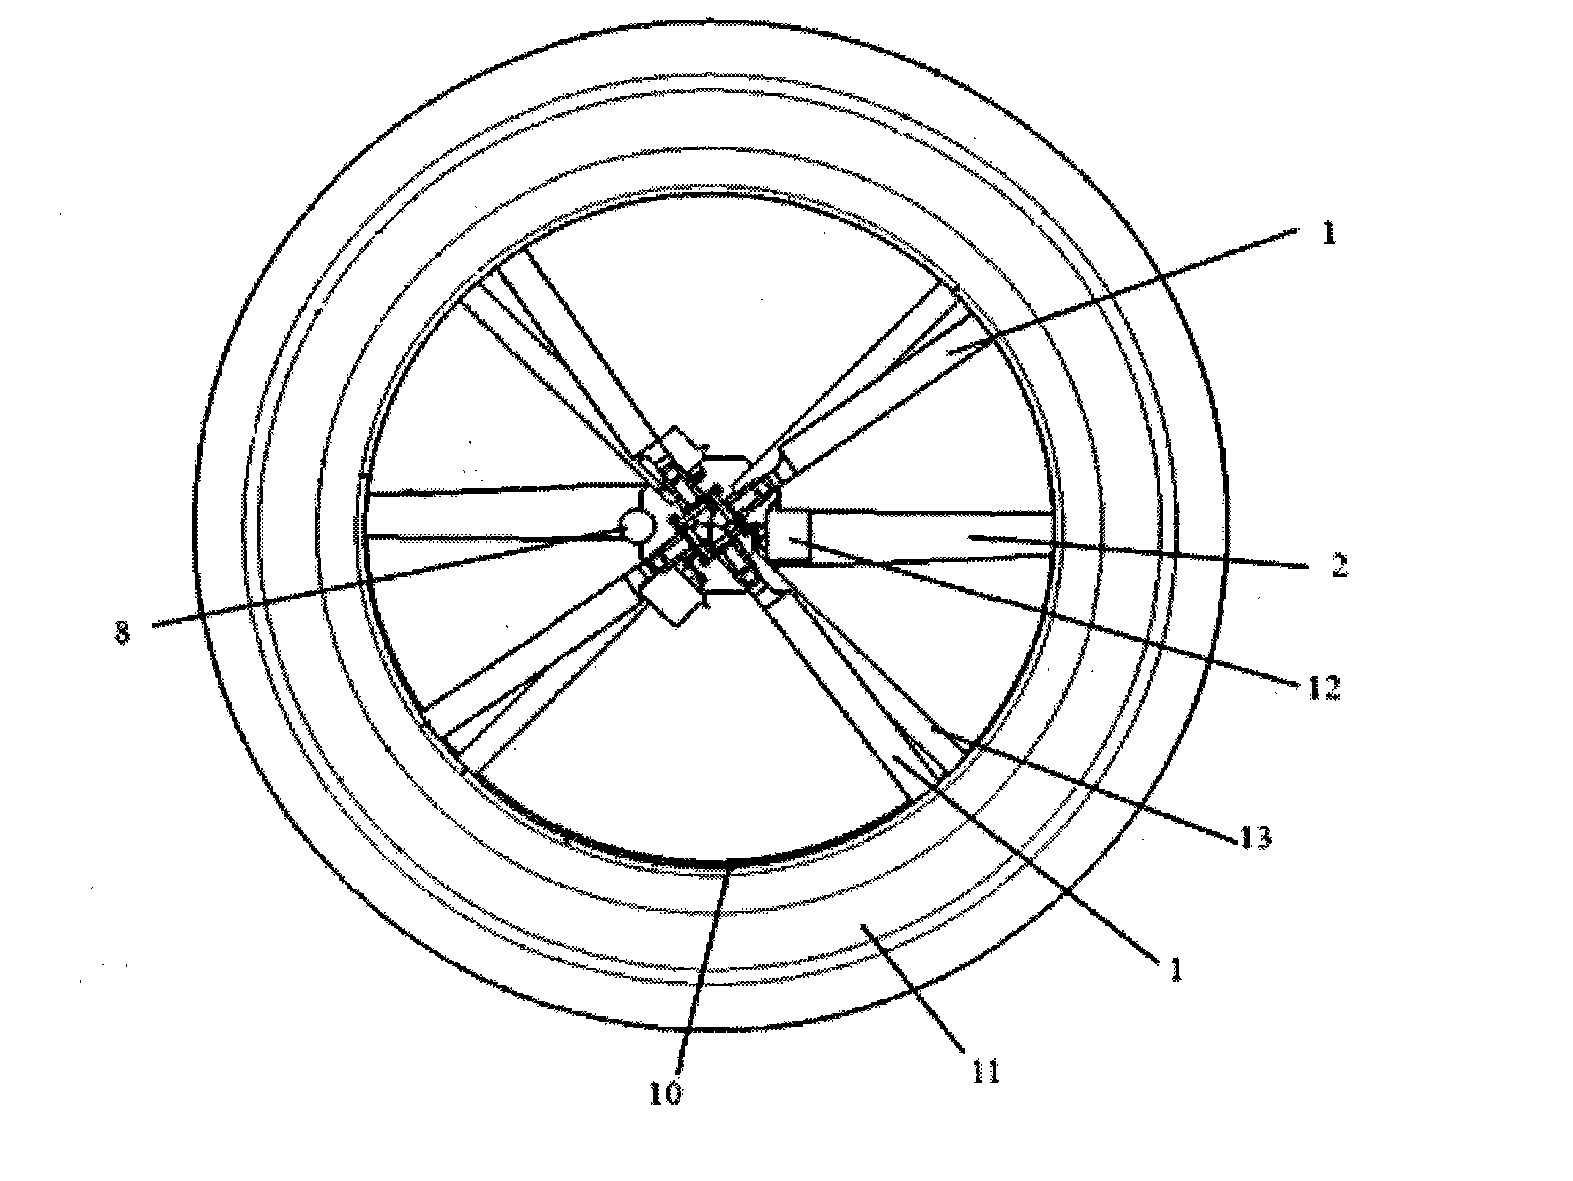 Single-ducted coaxial rotor/propeller saucer-shaped aircraft